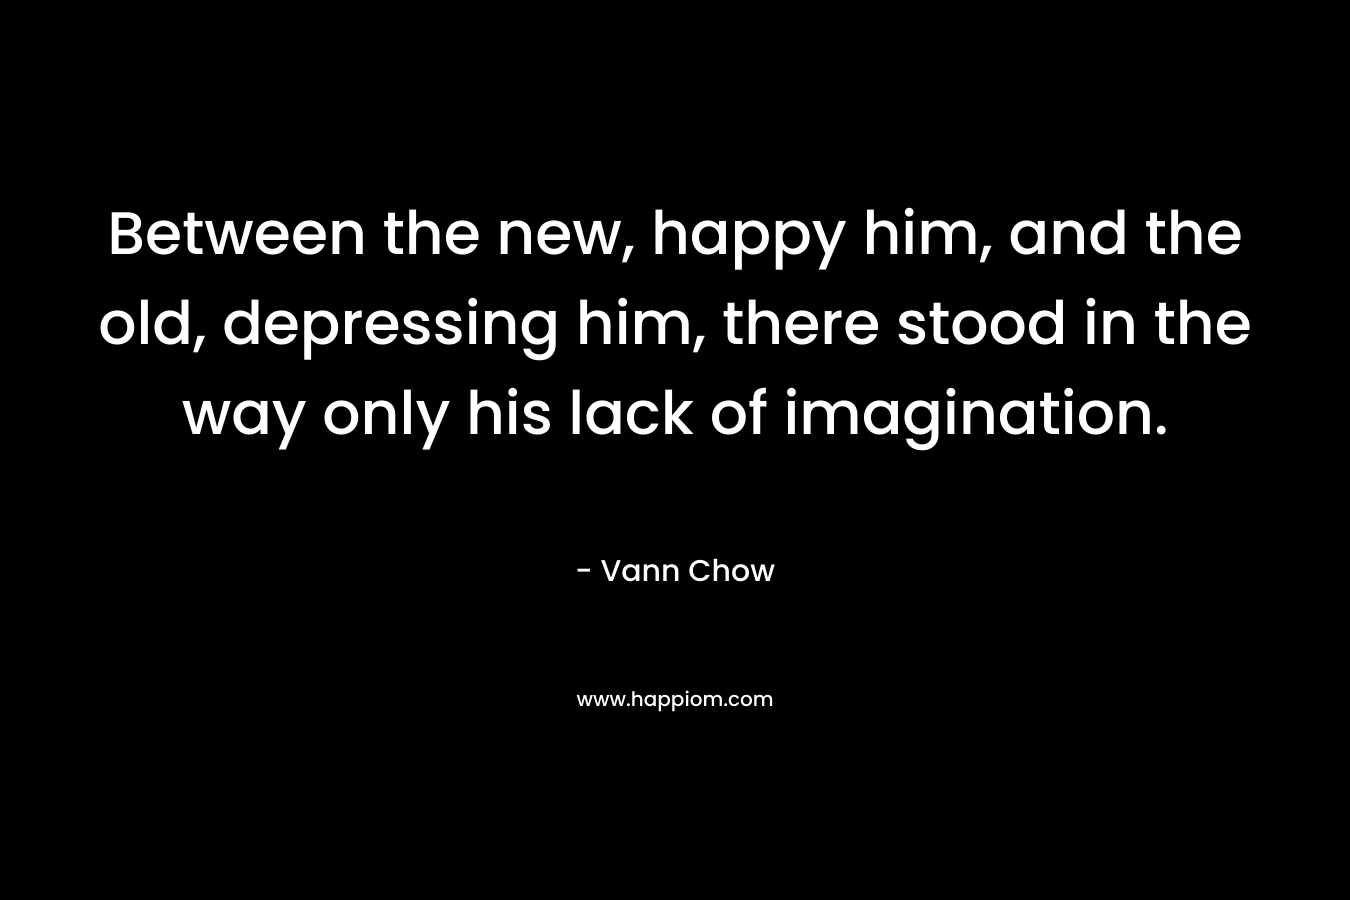 Between the new, happy him, and the old, depressing him, there stood in the way only his lack of imagination.